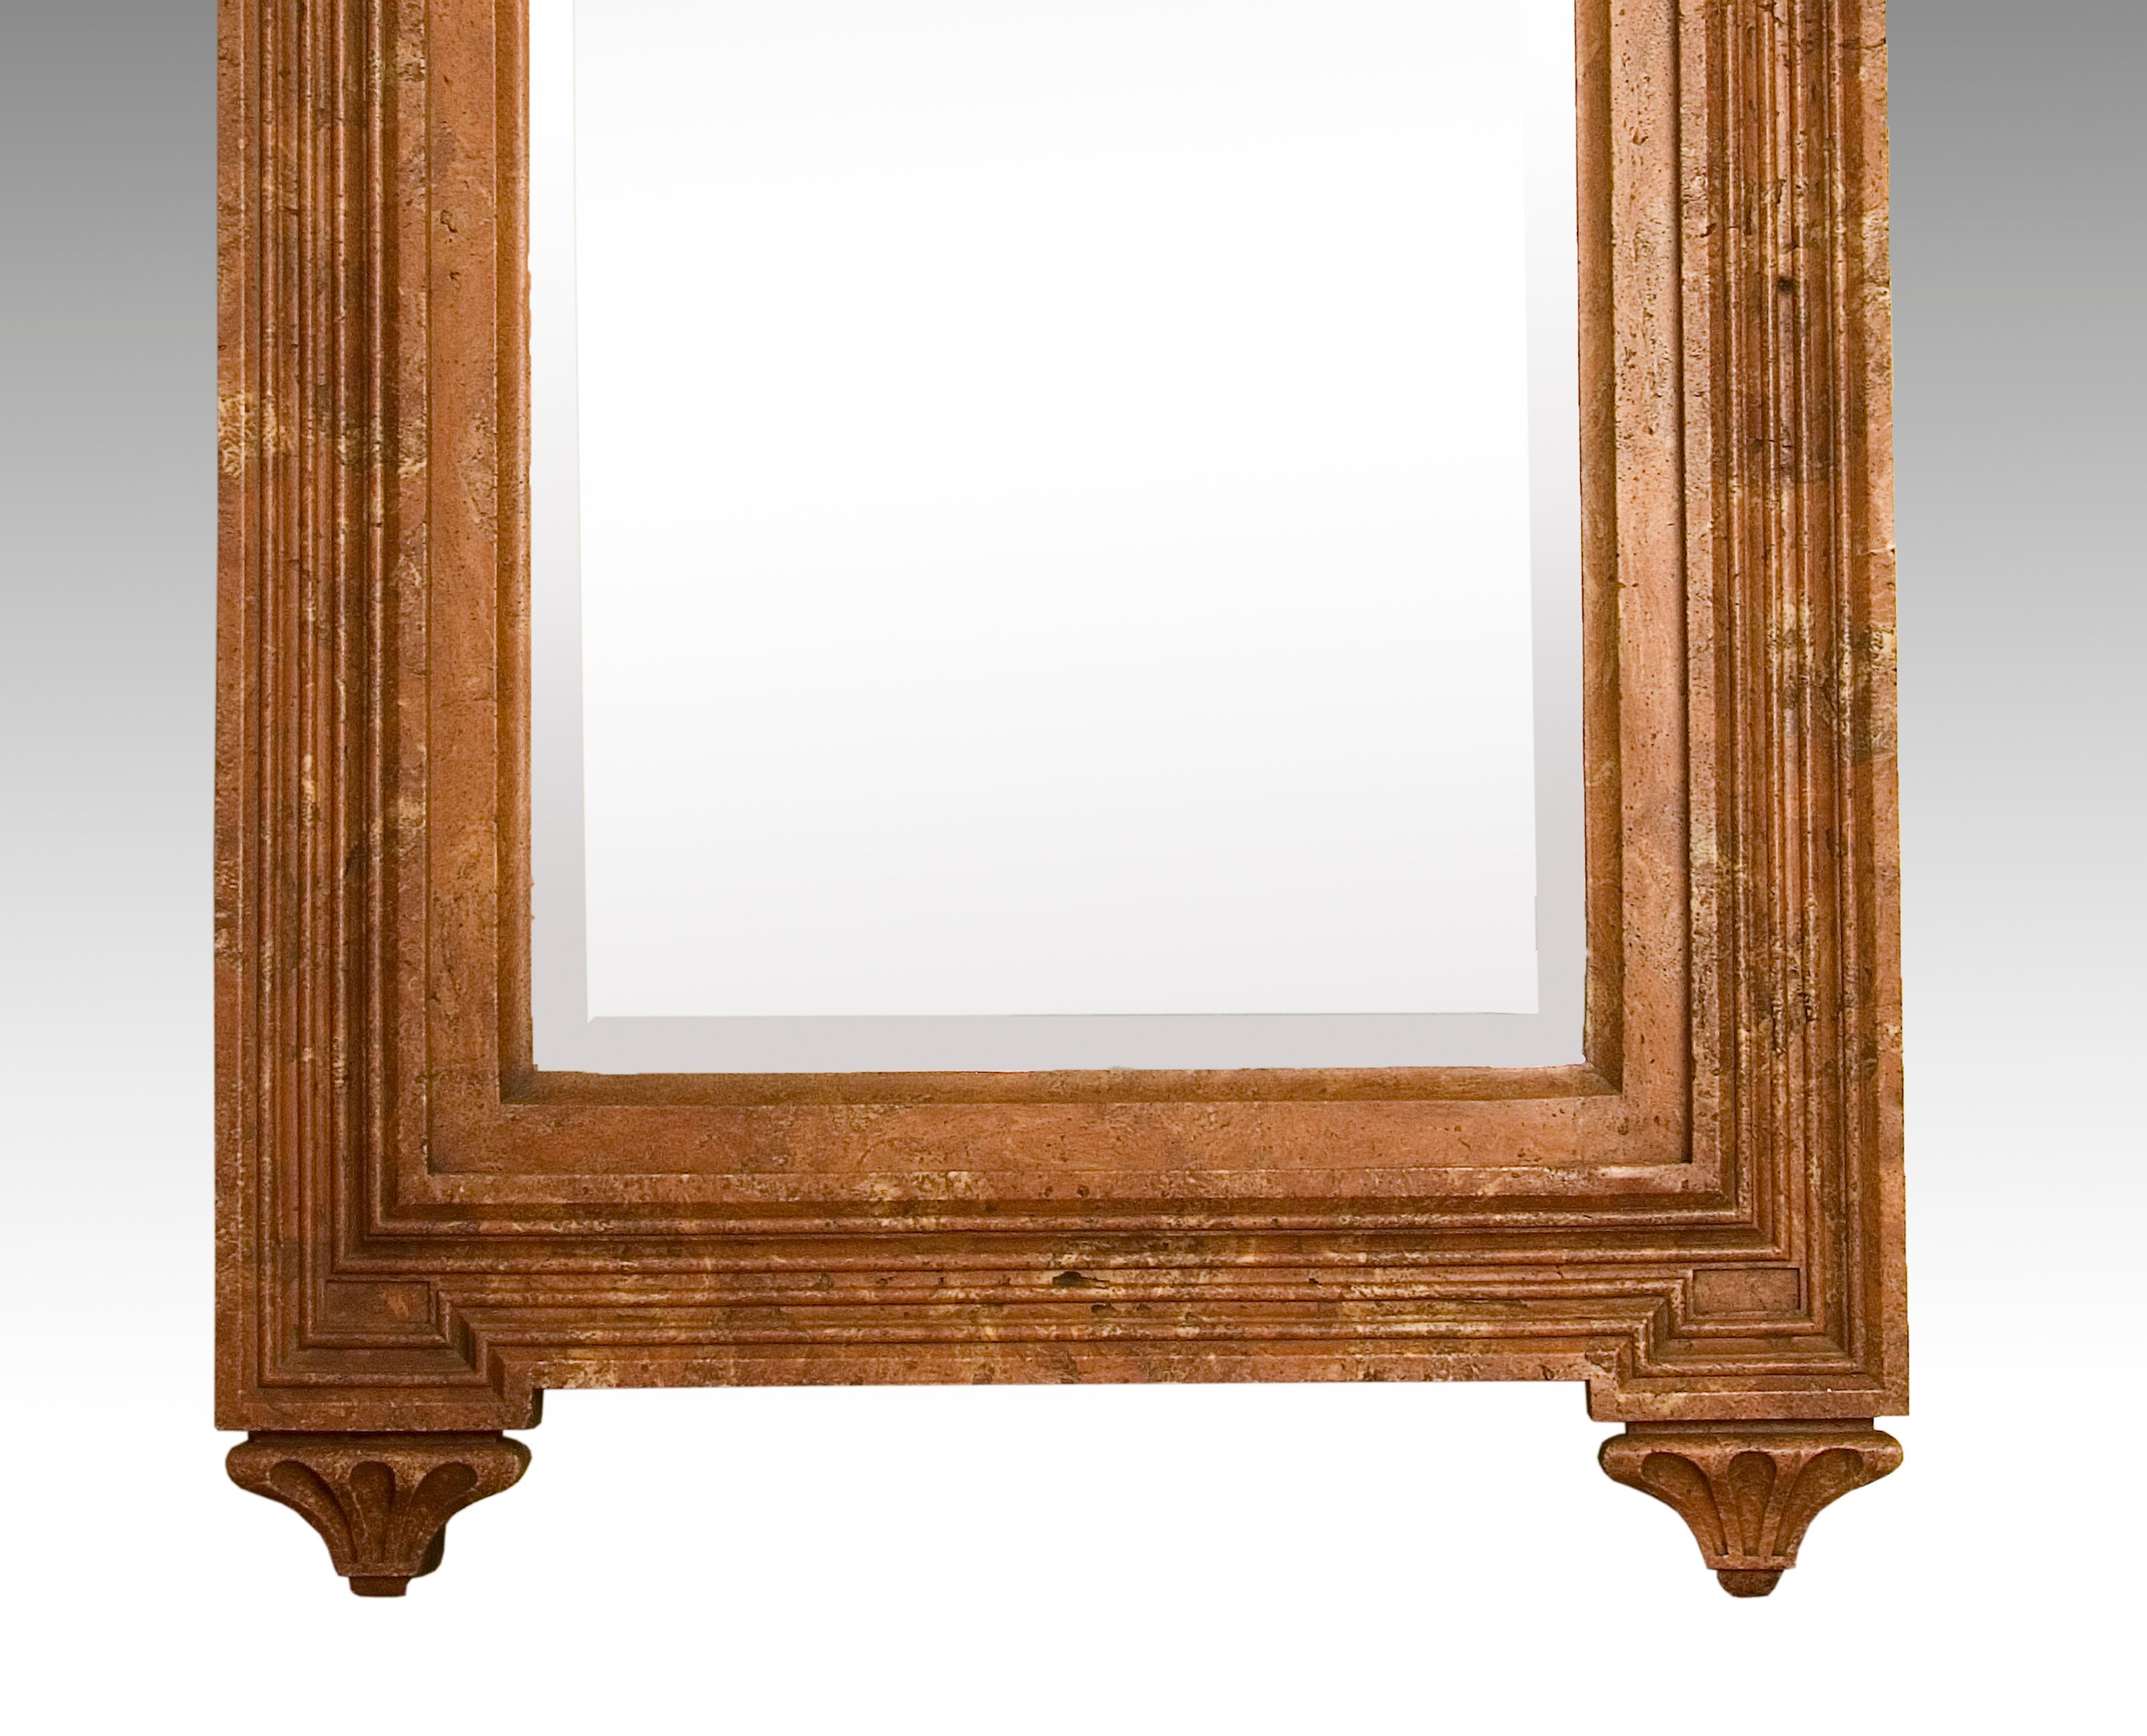 Renaissance style mirror in marble dust.
The rectangular mirror with semicircular curvature in its upper part has been highlighted following these same lines with a frame finished in marble powder. The chosen decorative elements inspire Renaissance